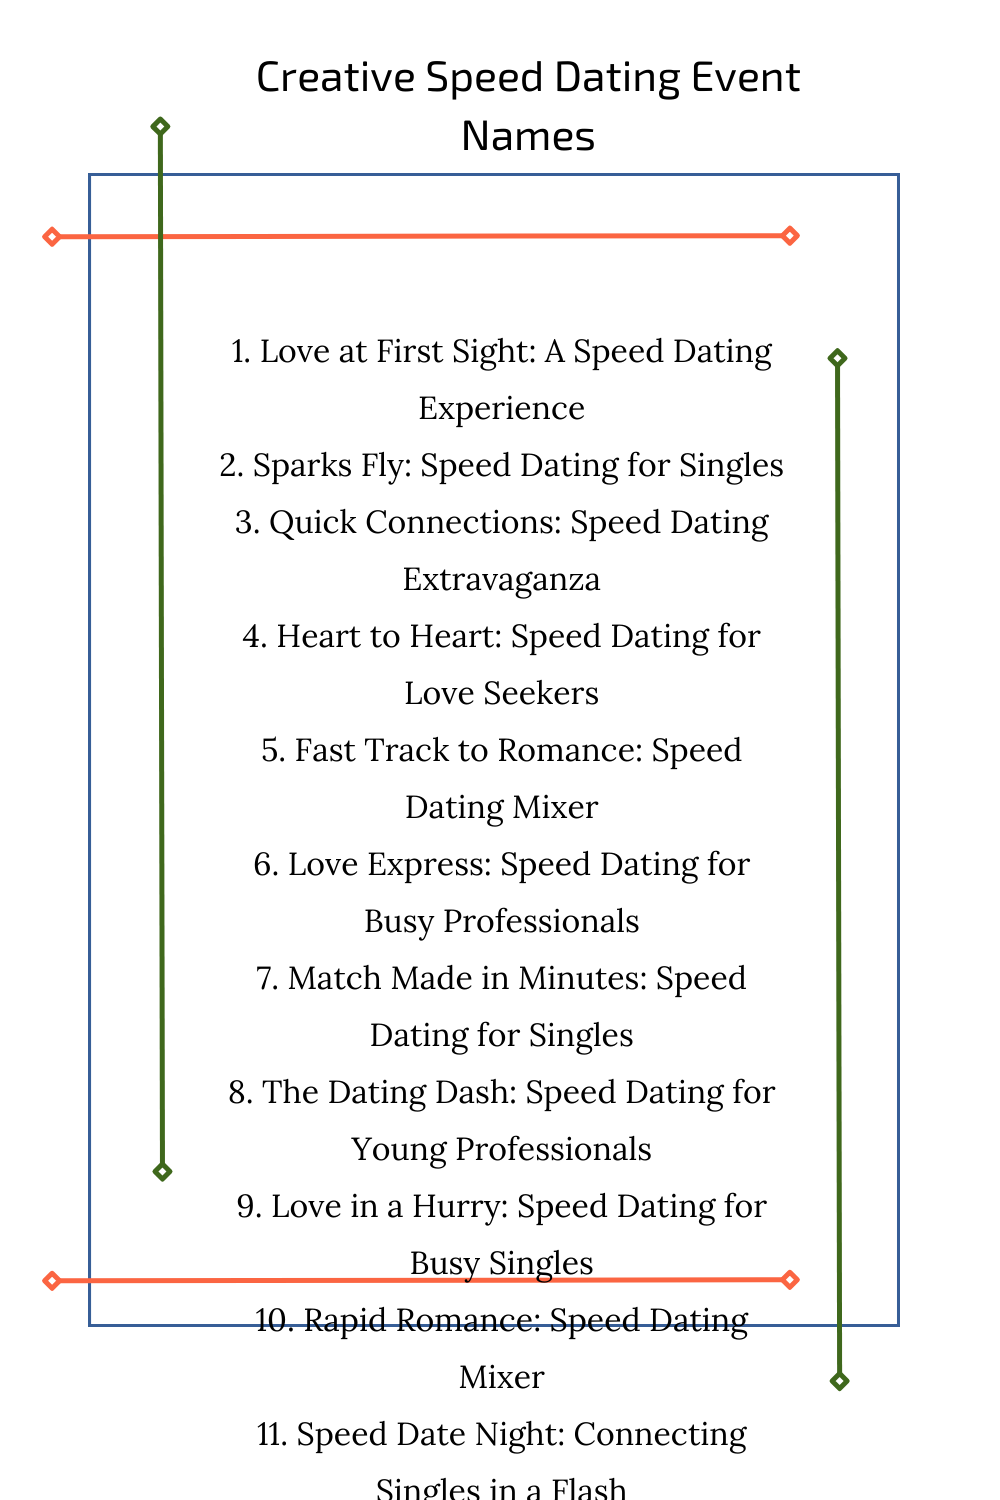 Creative Speed Dating Event Names